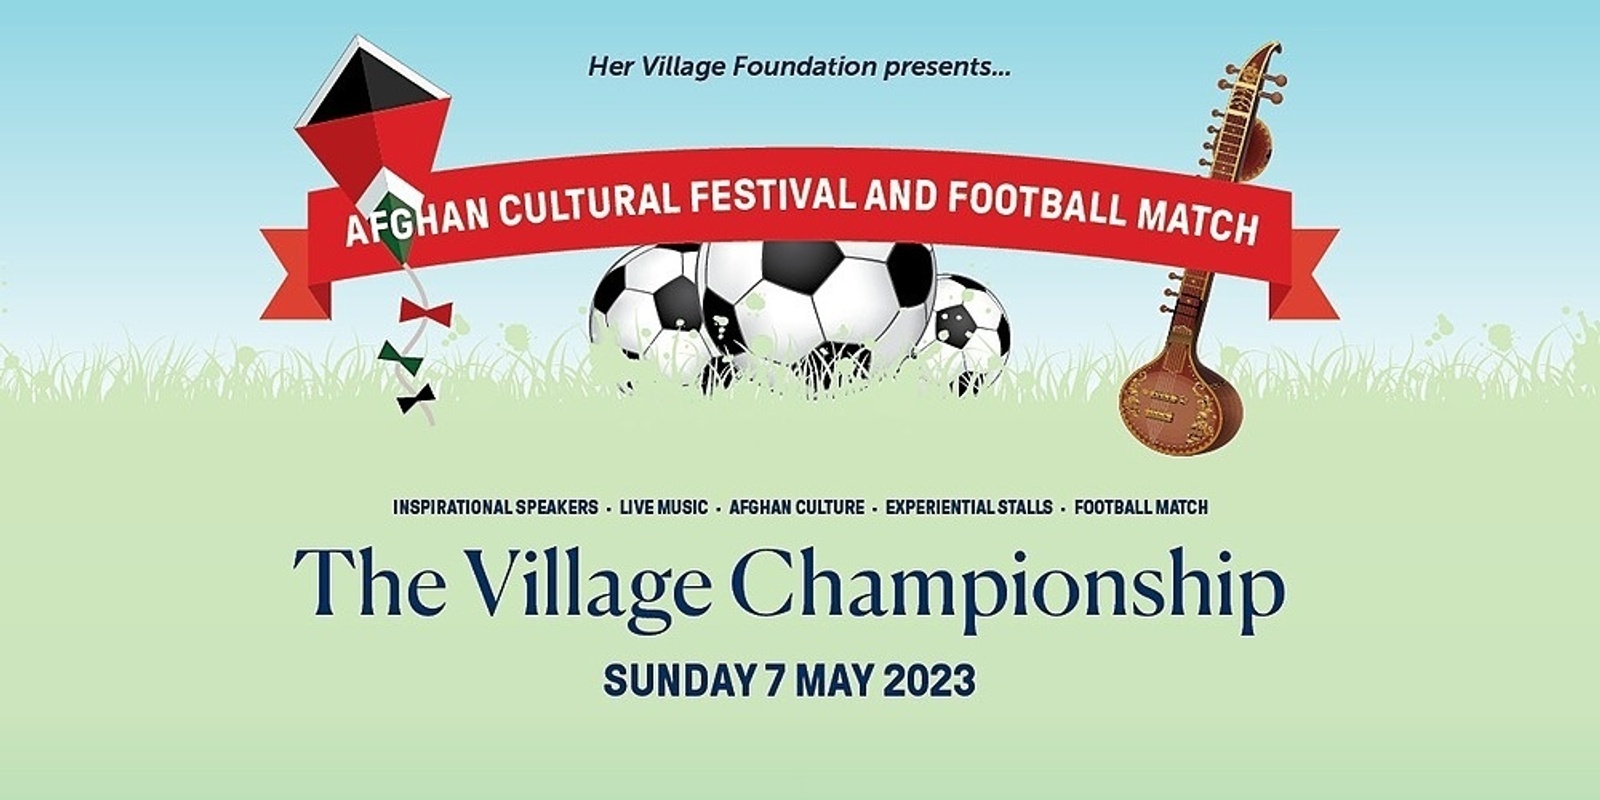 Banner image for The Village Championships - Afghan Cultural Festival and Football Match 2023